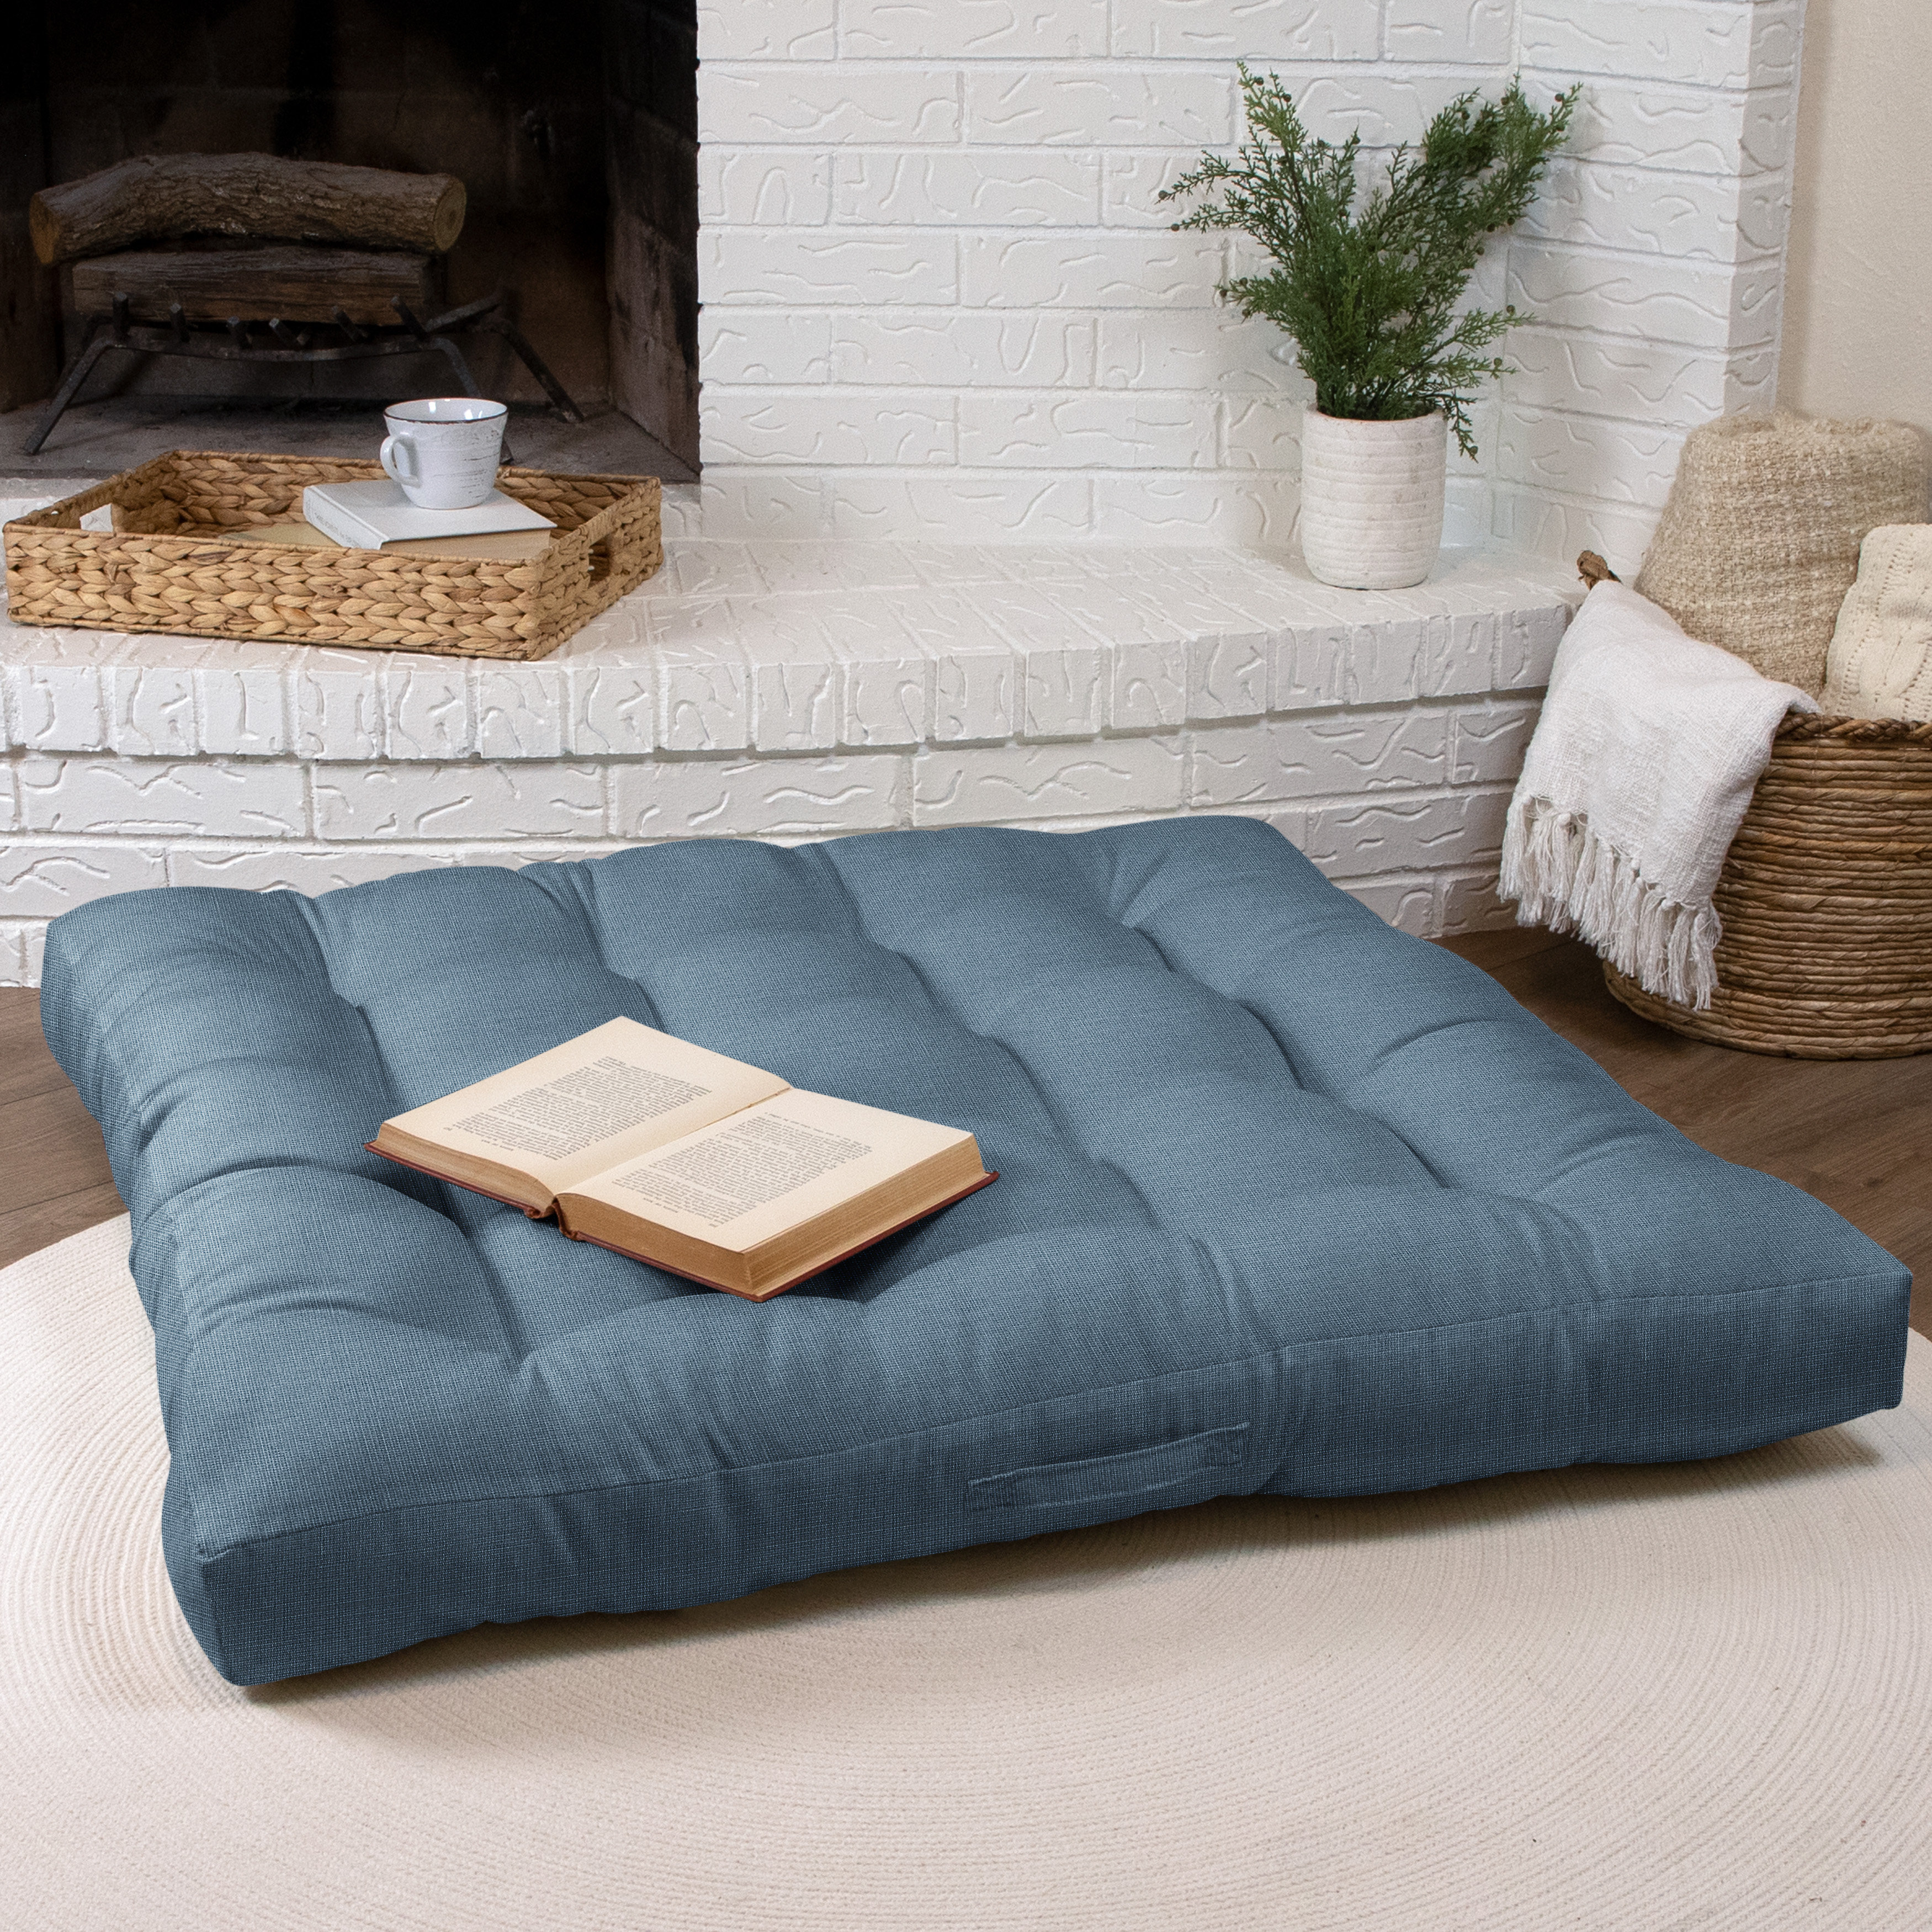 Outdoor Floor Cushion Water Repellent Floor Pillow Large Floor Seating  Montessori Mat Patio Bench Cushion Tufted Pillow 